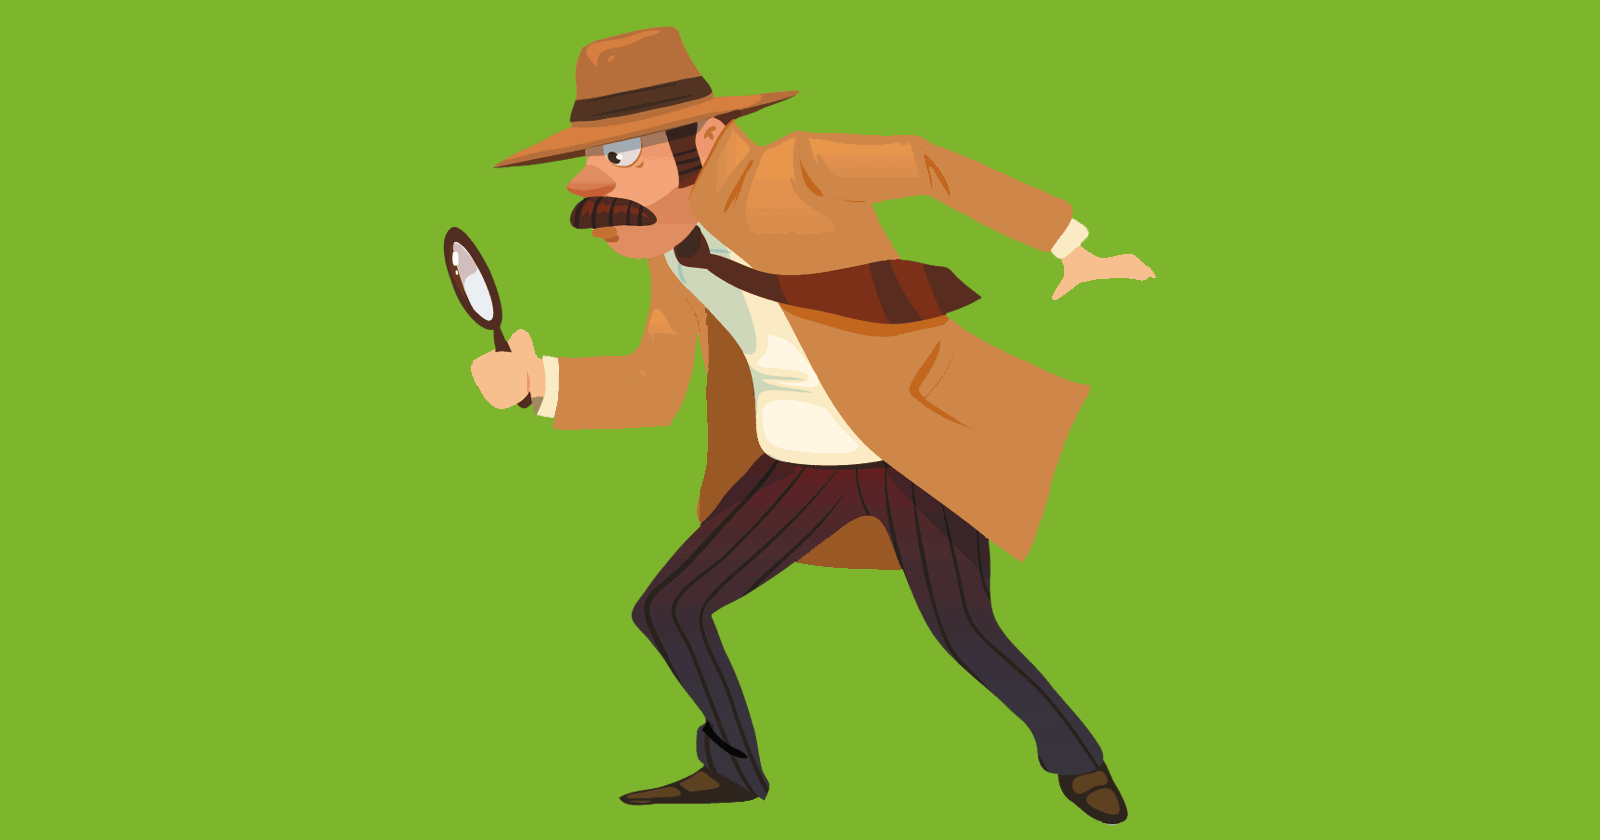 Image of a detective that represents Google's spam searching algorithm